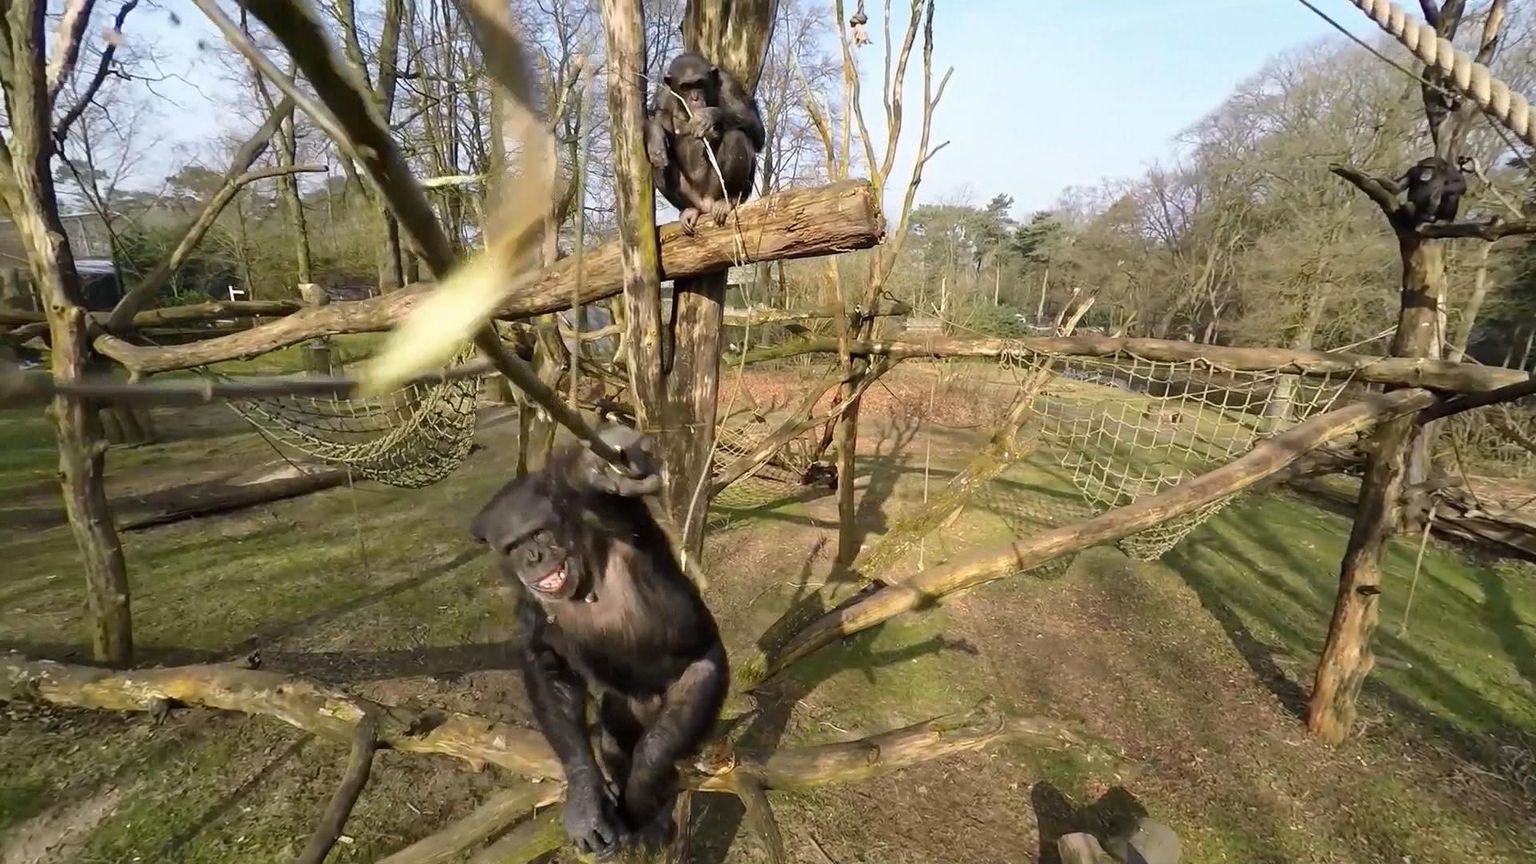 Tushi the chimpanzee, foreground, hits a drone with a stick.